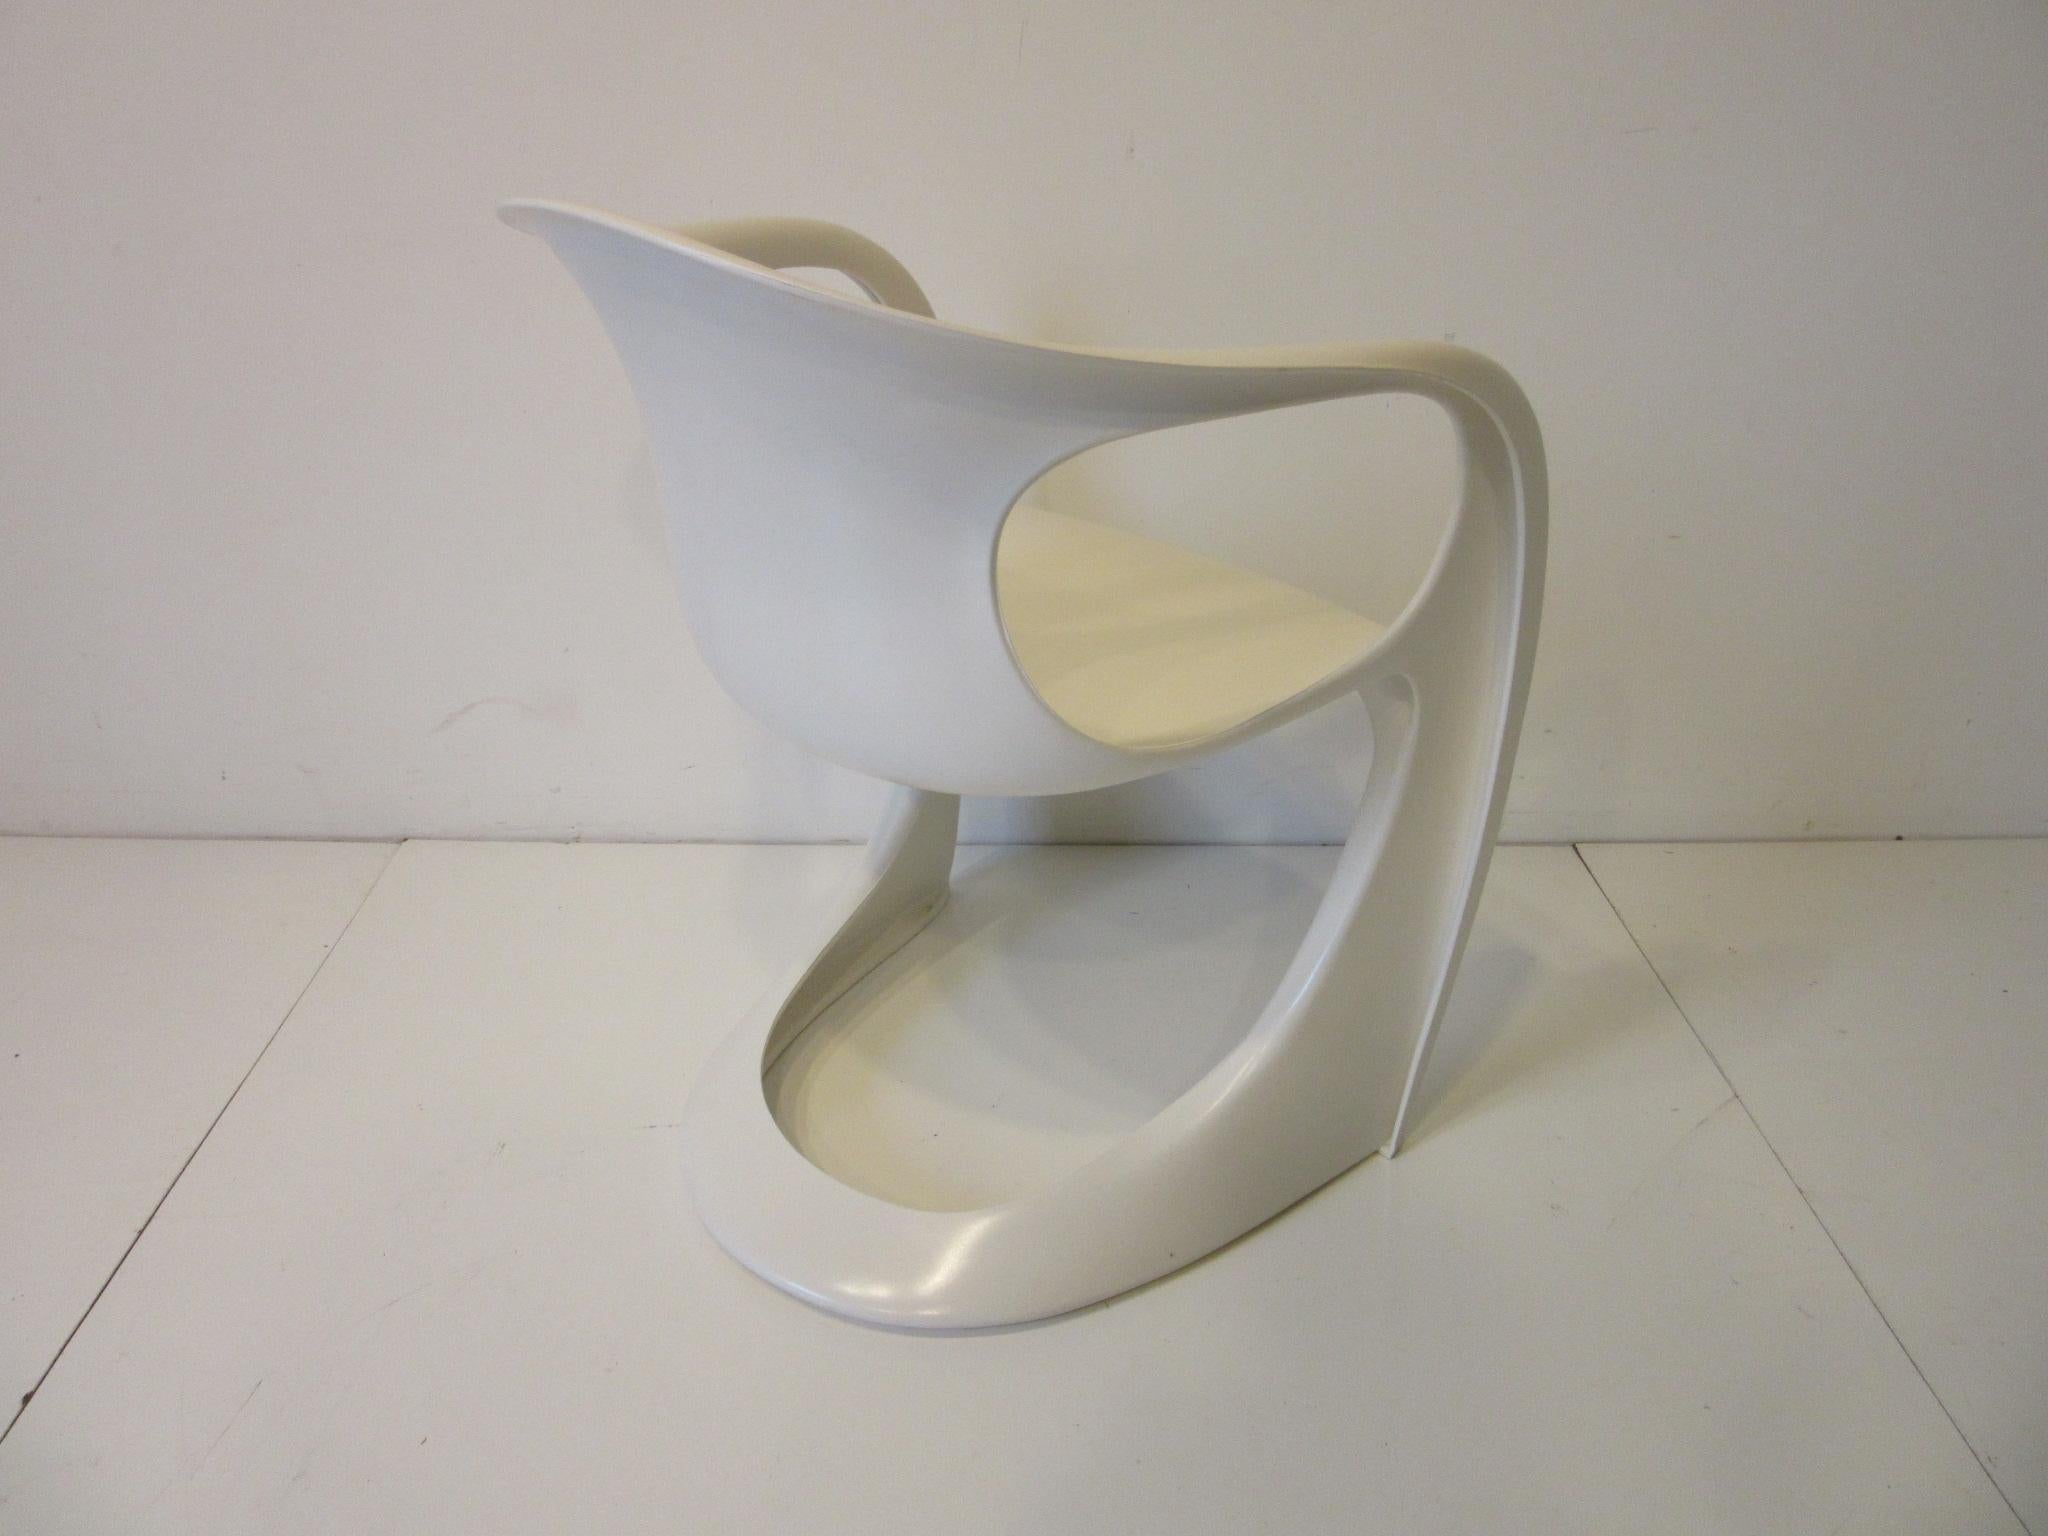 A molded sculptural soft white colored Casalino chair using ABS plastic which is used in automobiles for strength and texture. A great 1970s design from the POP art period by Alexander Begge and sometimes referred to as the Begge chair.